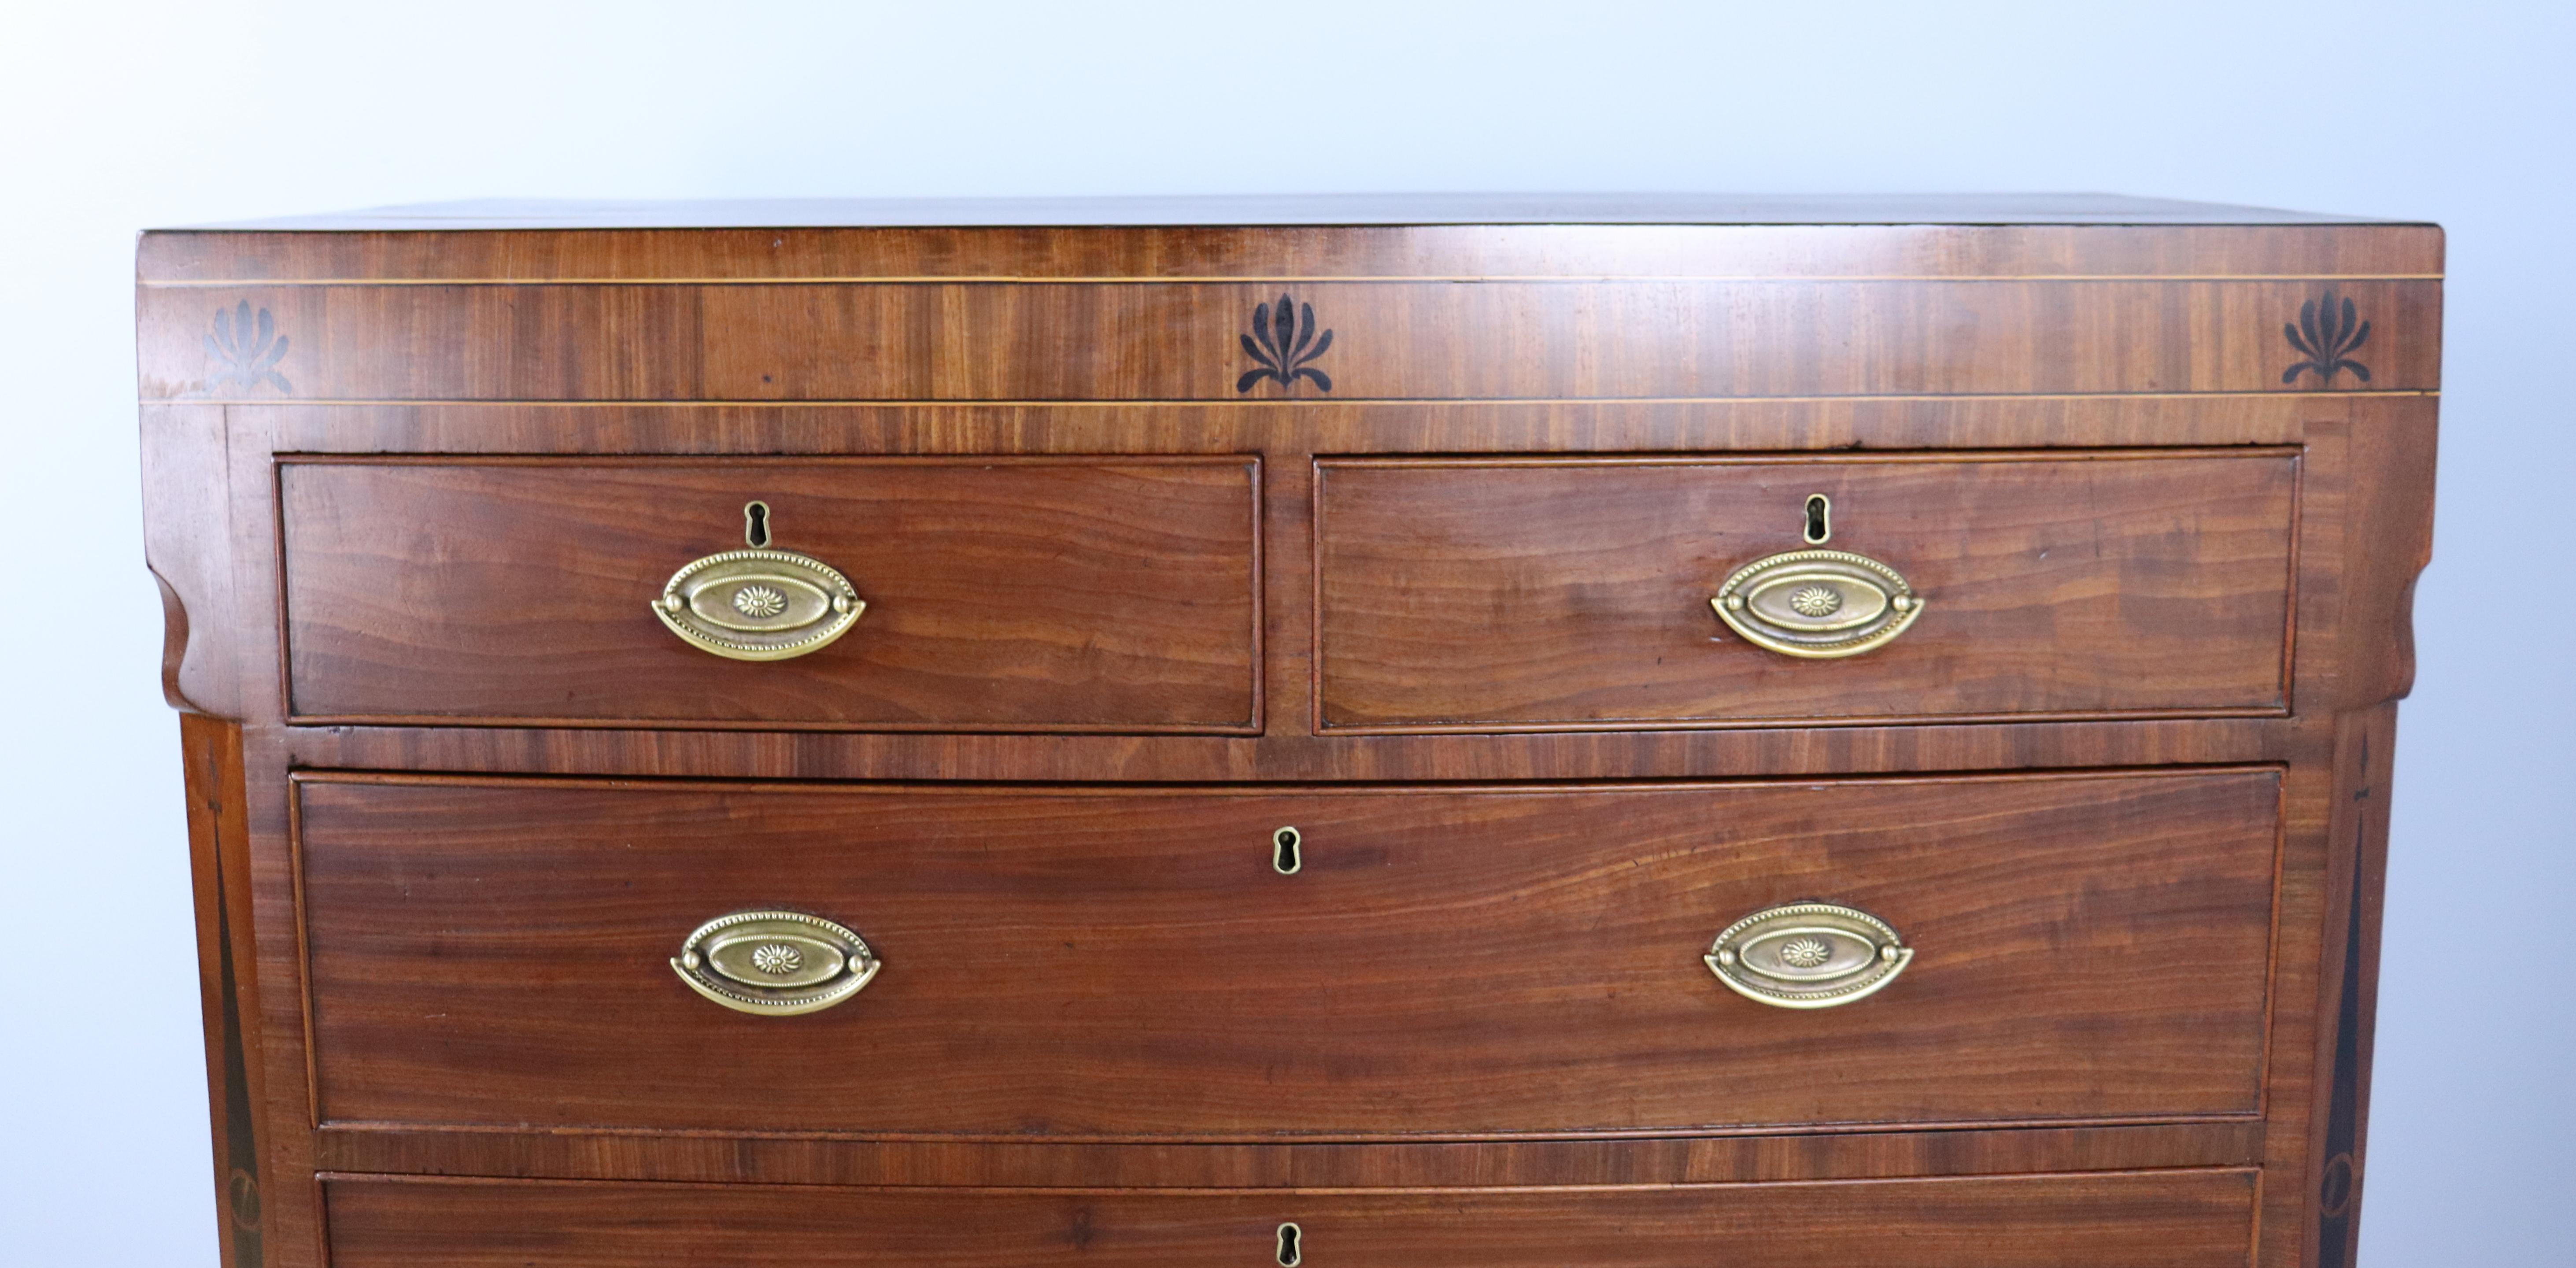 Early 19th Century Formal Georgian Chest of Drawers, Ebony and Satinwood Inlay